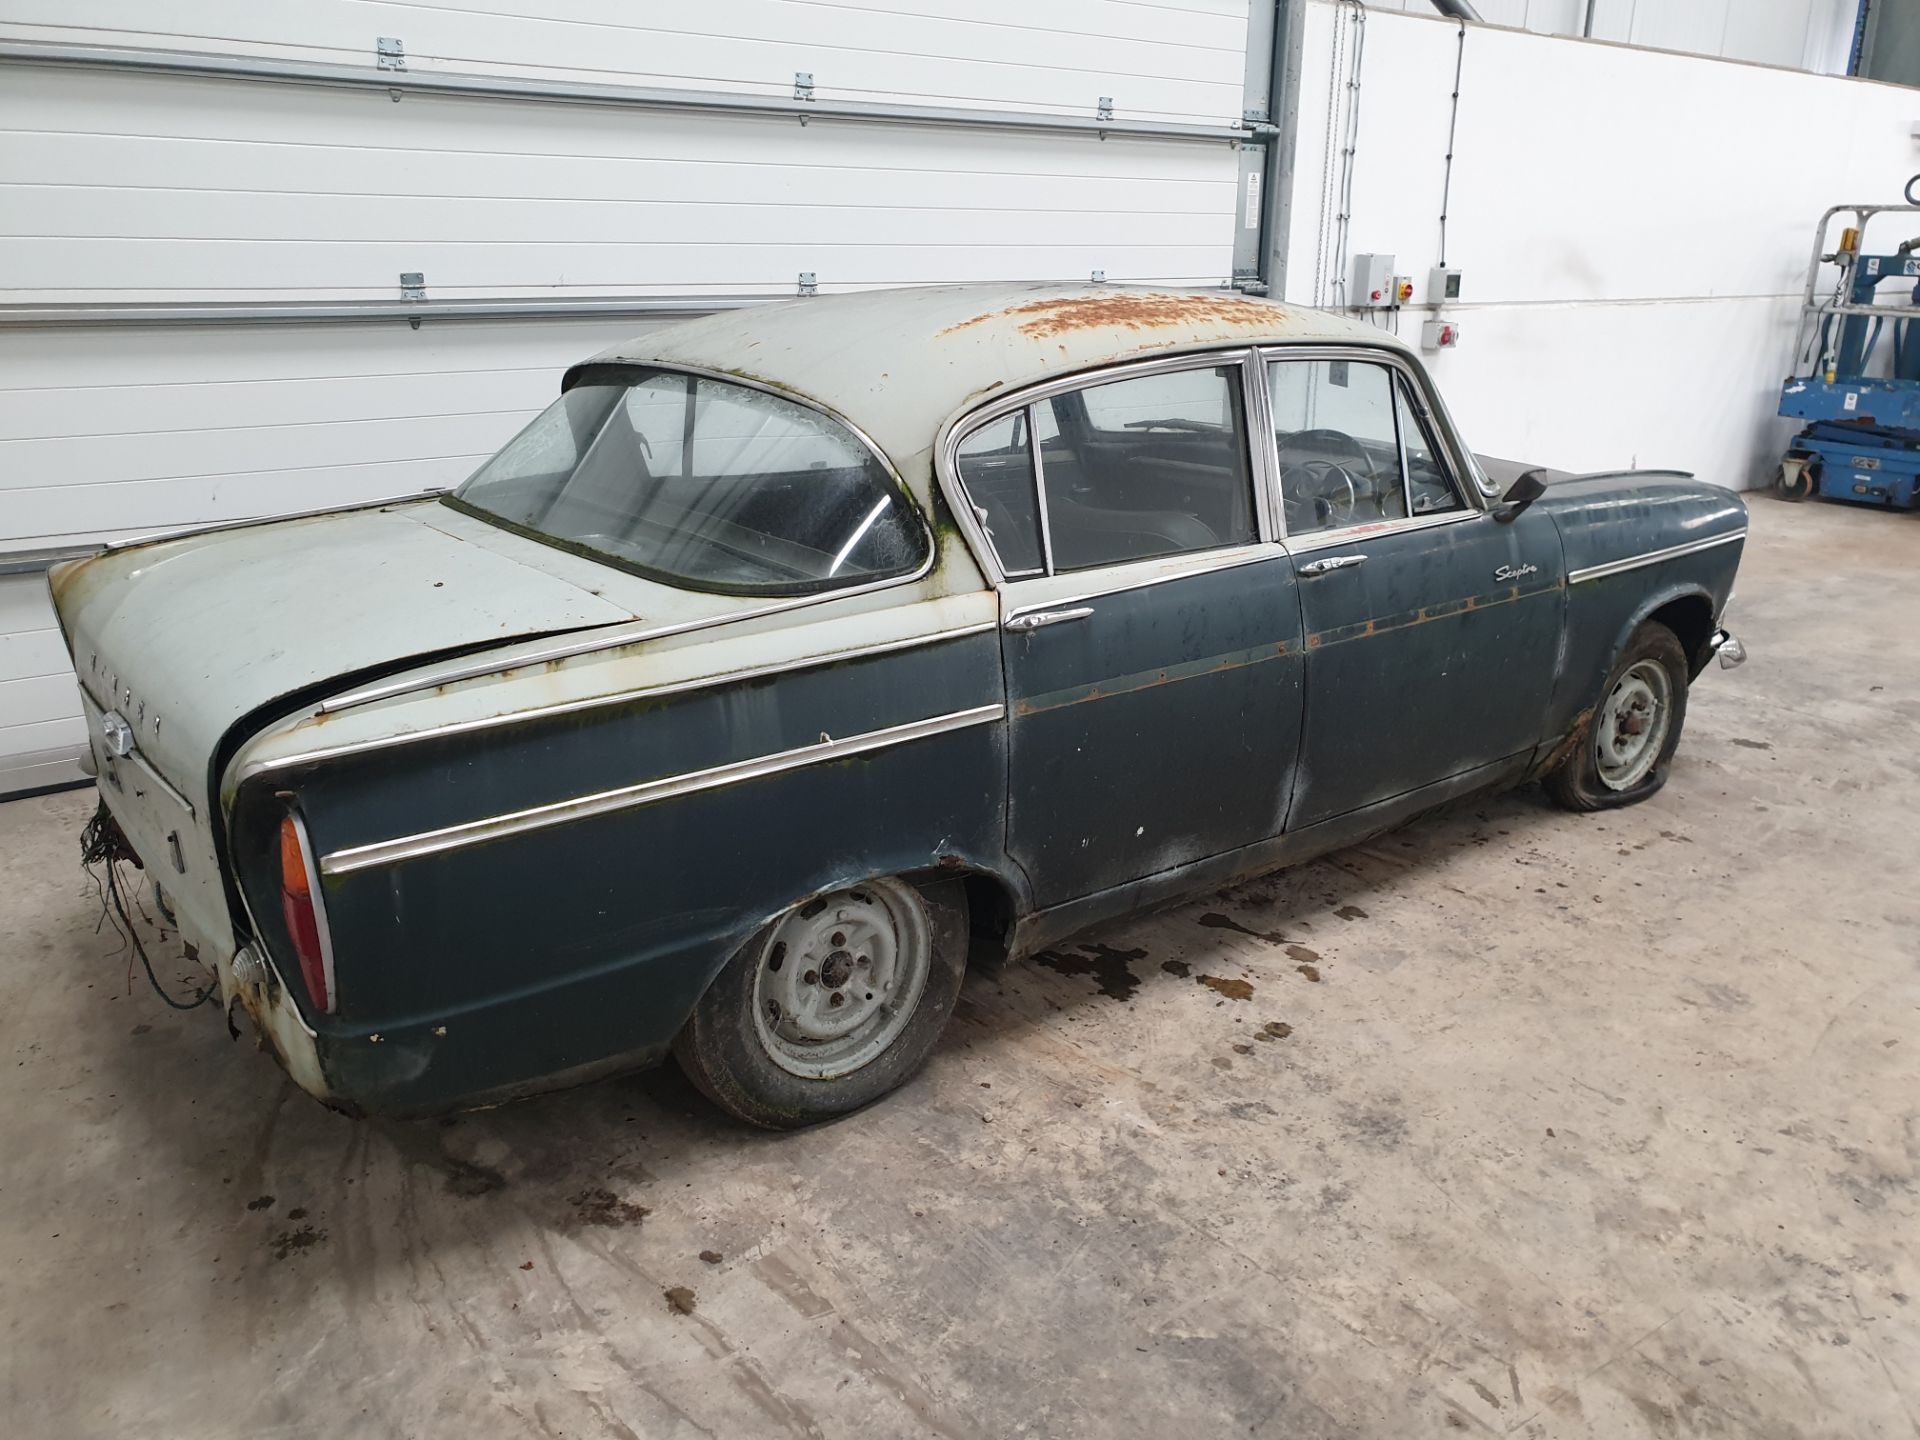 Humber Sceptre - Image 3 of 15